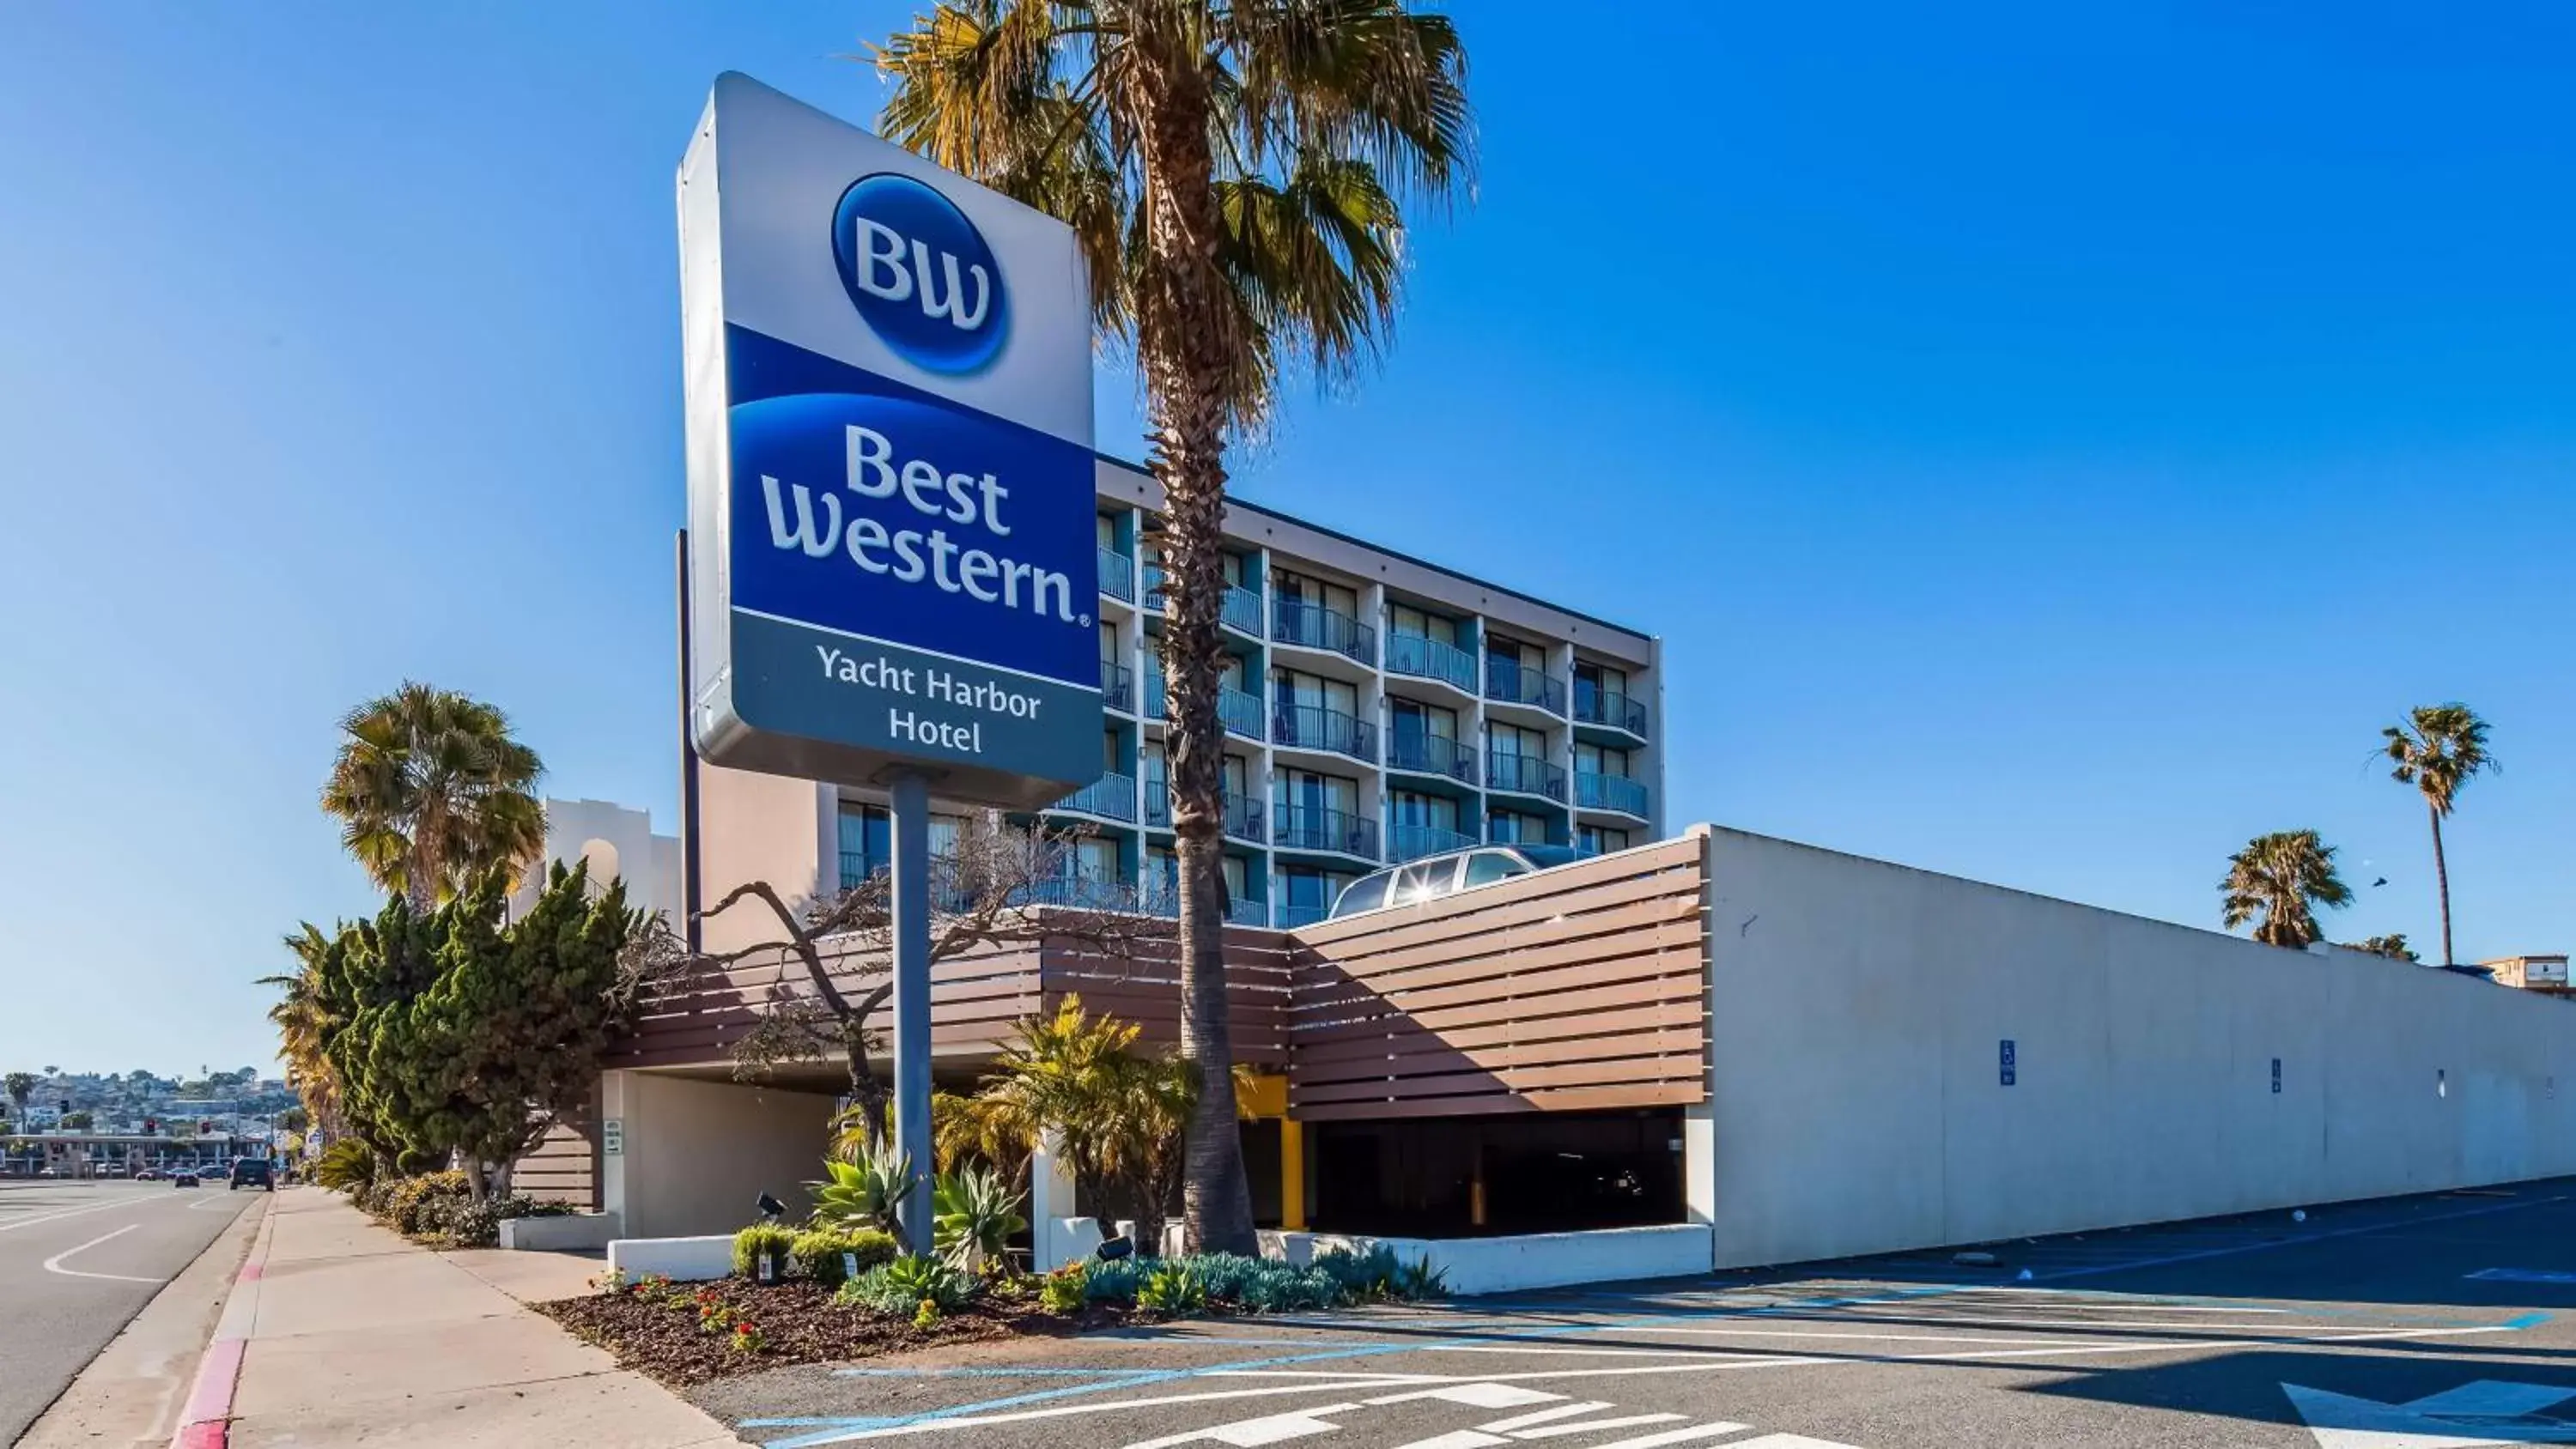 Property building in Best Western Yacht Harbor Hotel